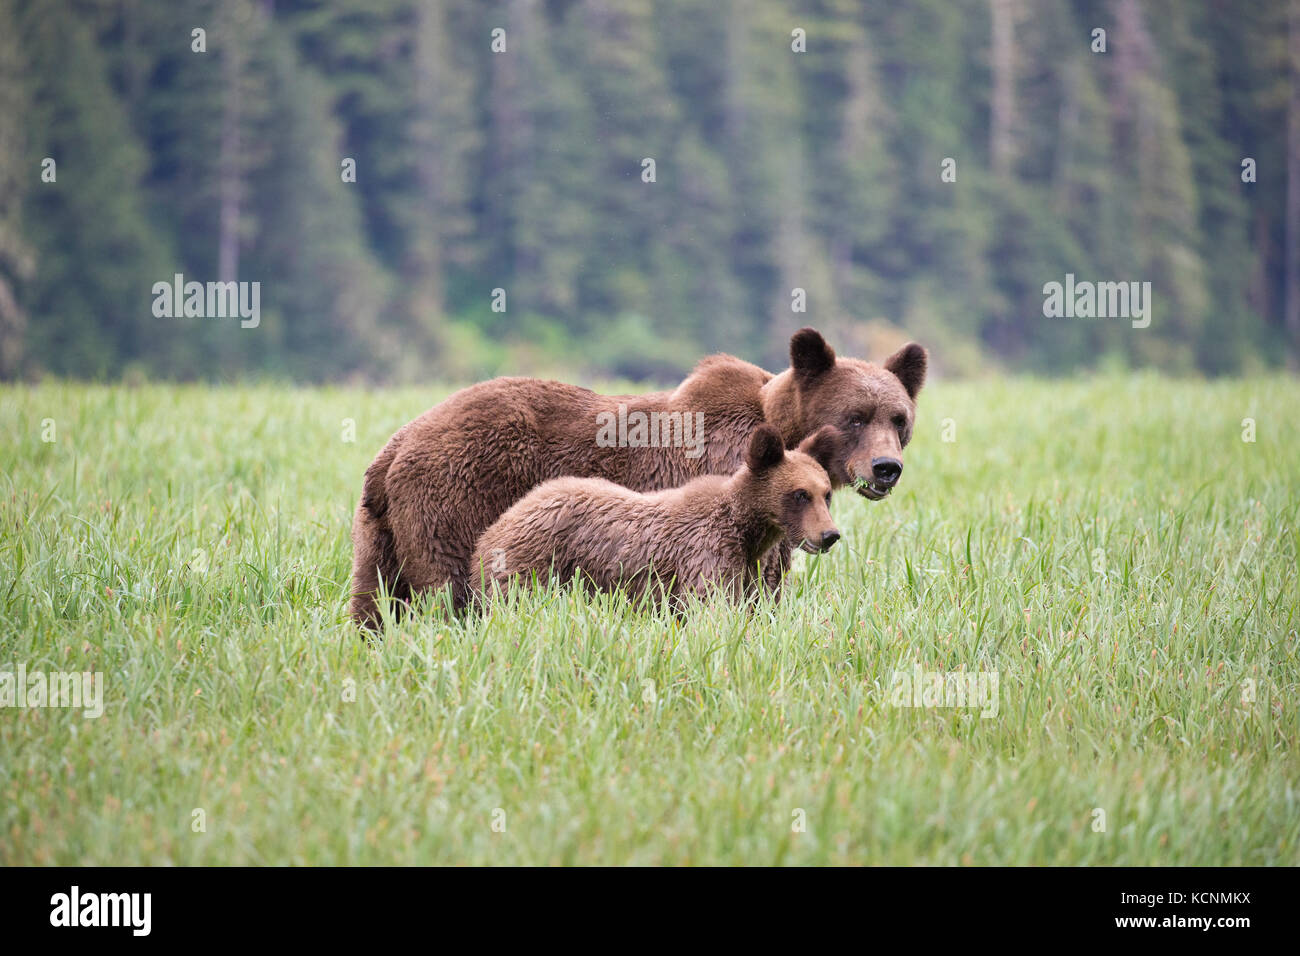 Grizzly bear (Ursus arctos horriblis), female and yearling cub eating Lyngbye's sedge (Carex lyngbyei), Khutzeymateen Grizzly Bear Sanctuary, British Columbia, Canada. Stock Photo